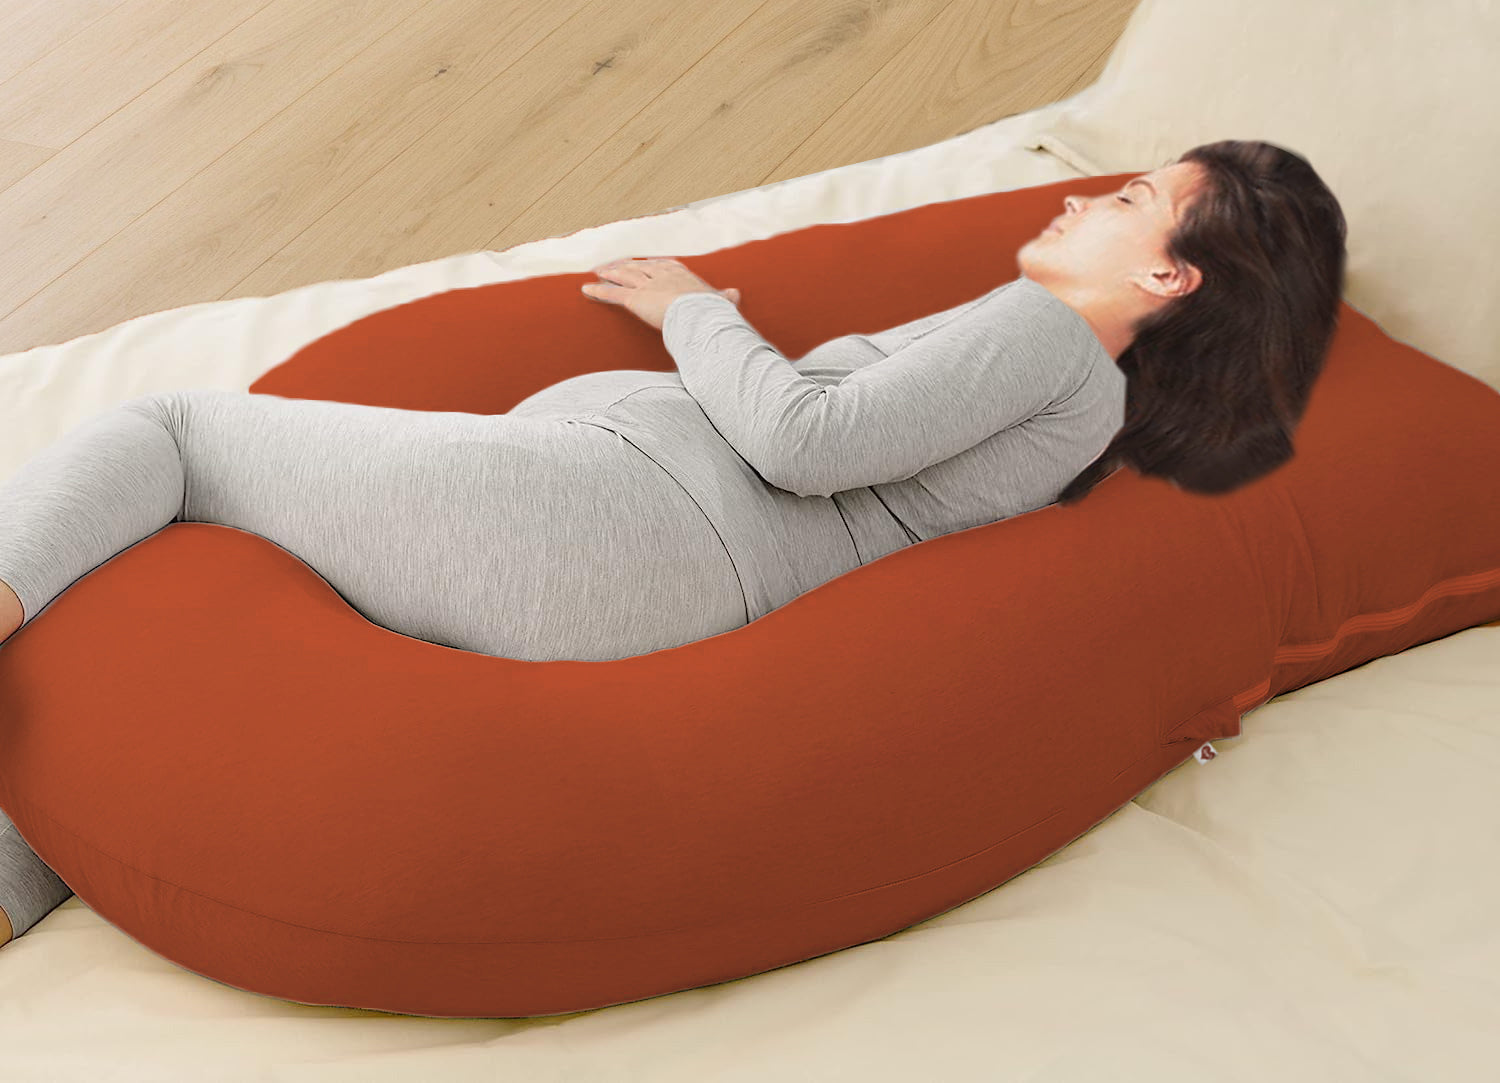 Brick Orange-Coozly Belly Back Pregnancy Pillow